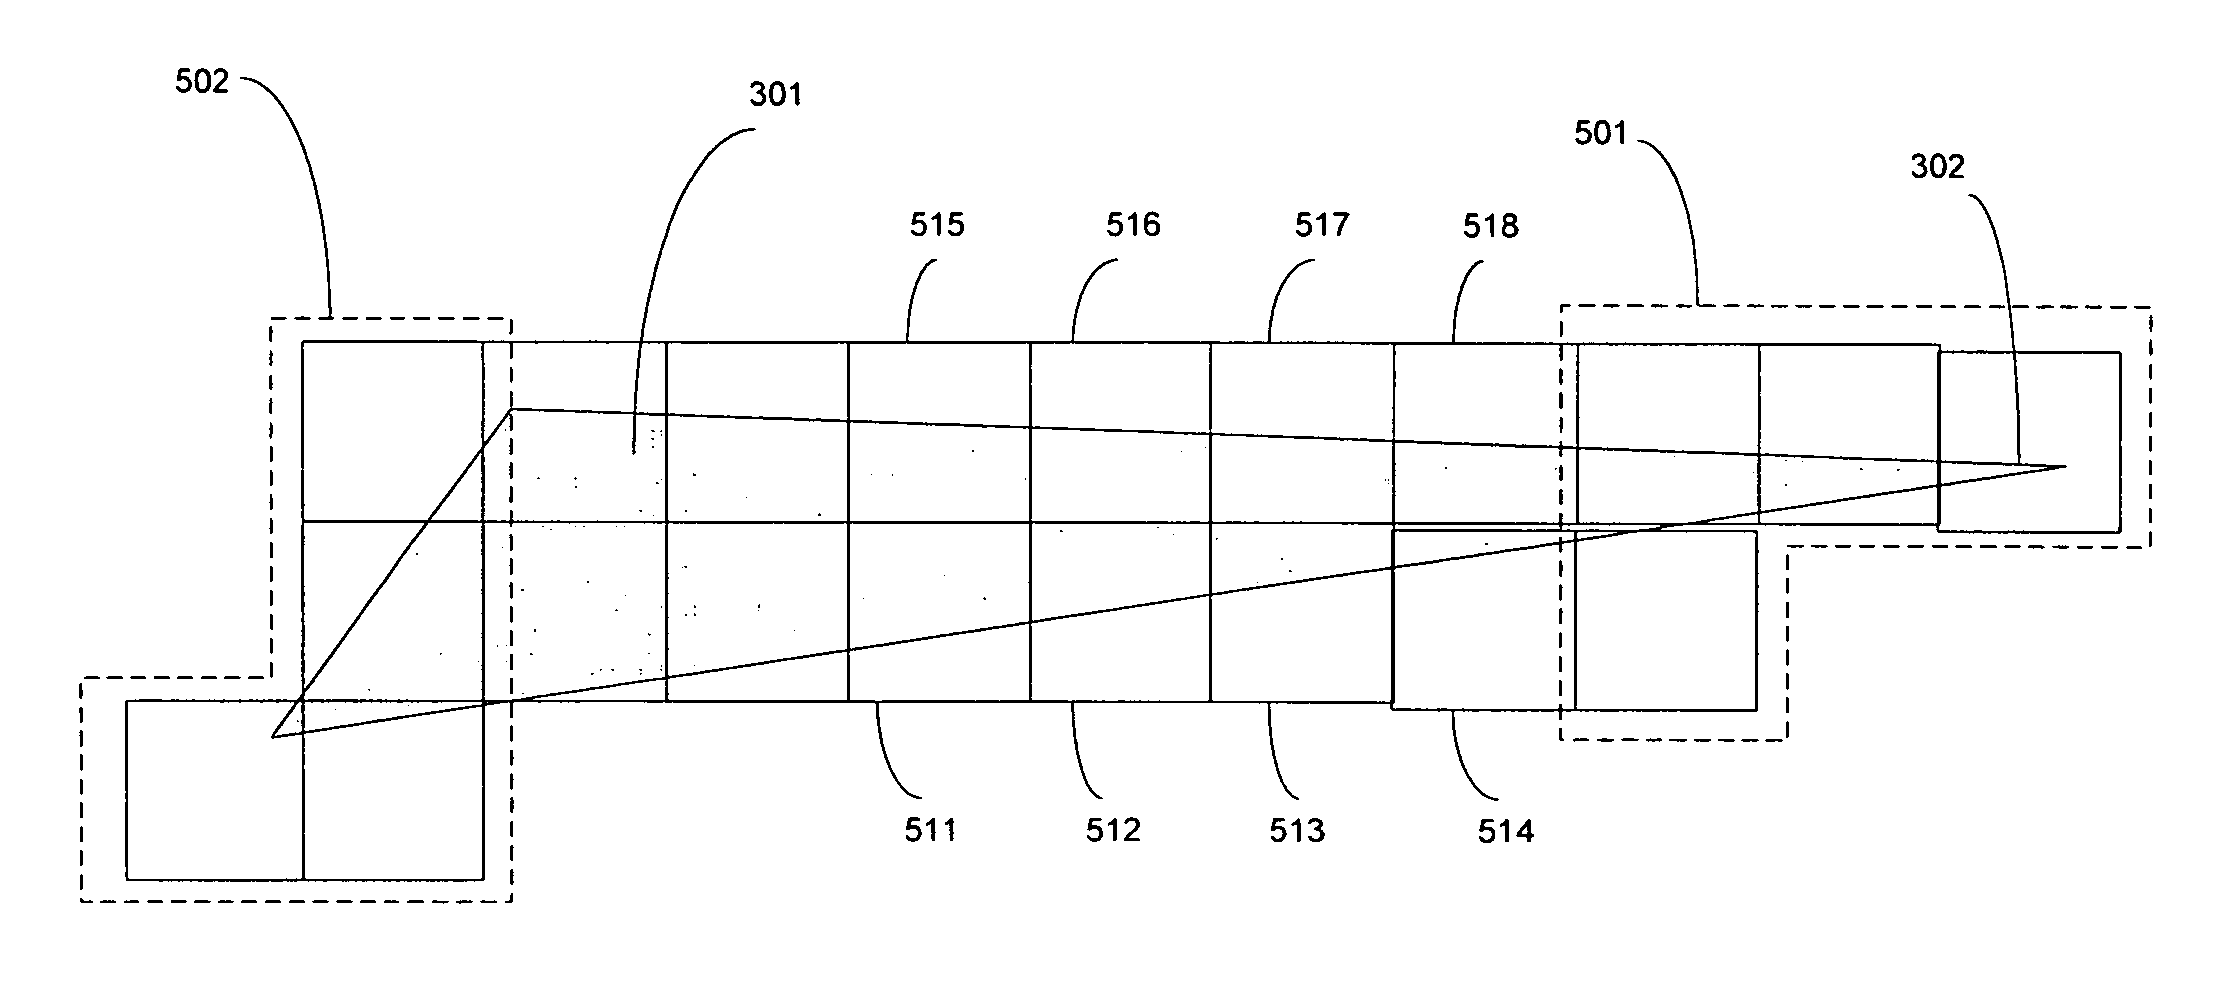 Method for rasterizing non-rectangular tile groups in a raster stage of a graphics pipeline